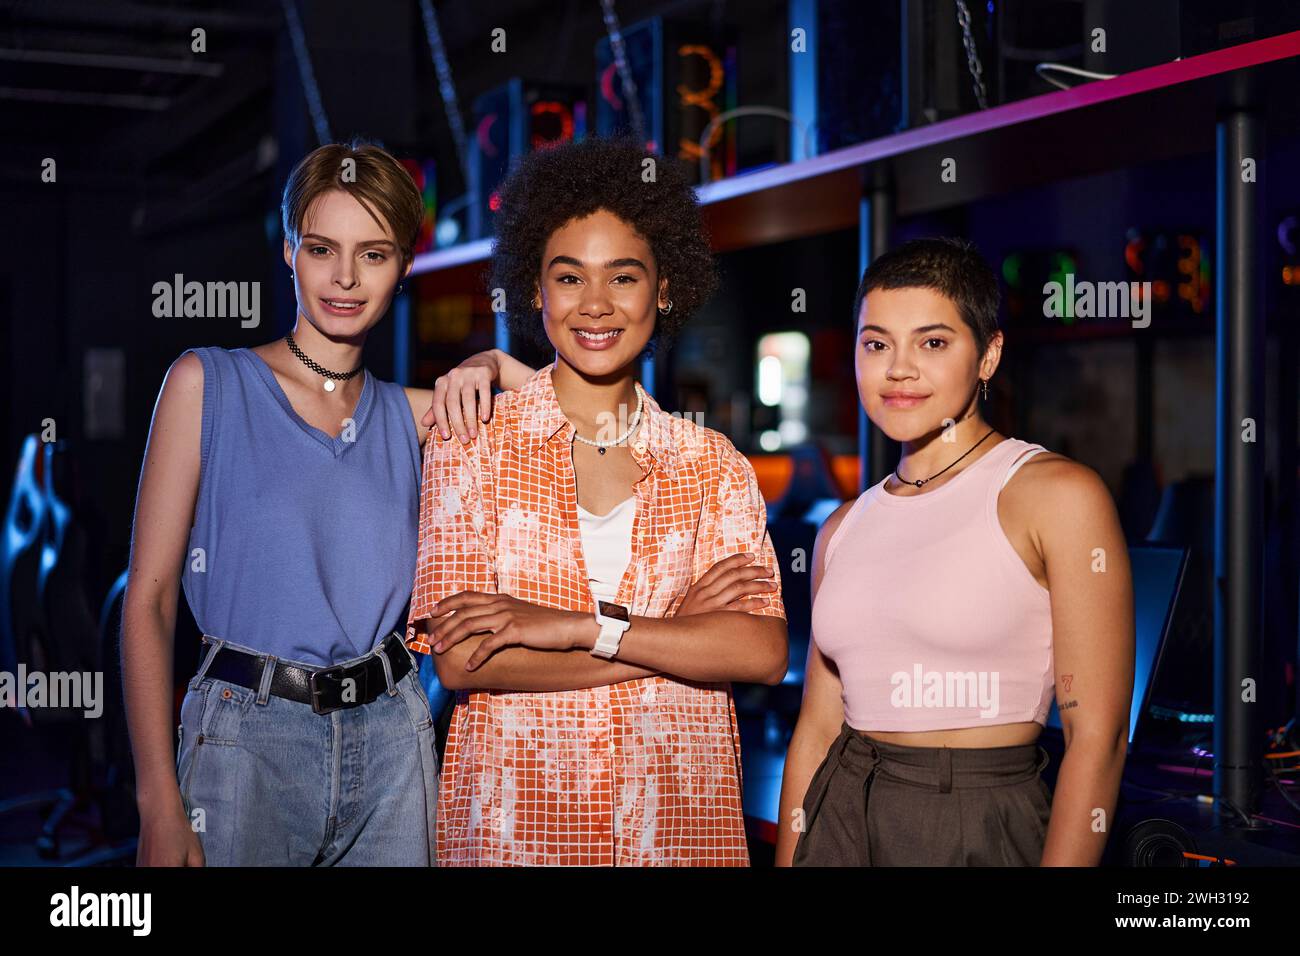 A stylish group of women with radiant smiles and fashionable clothing gather for a fun night out Stock Photo